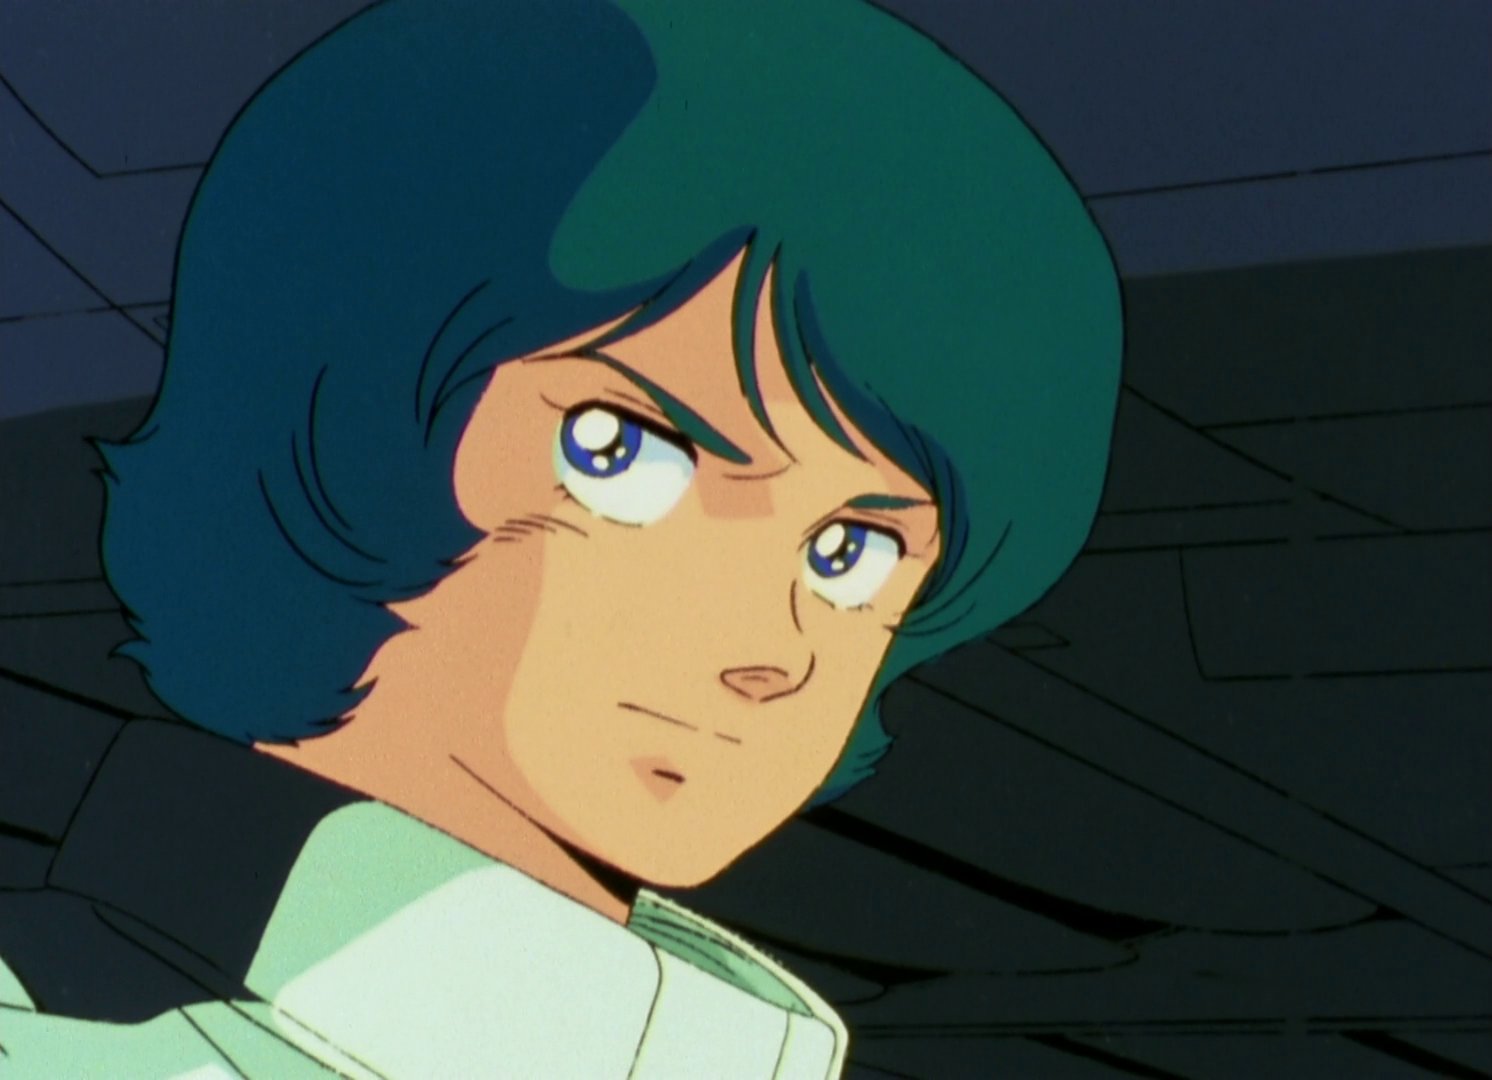 Kamille just staring at her.